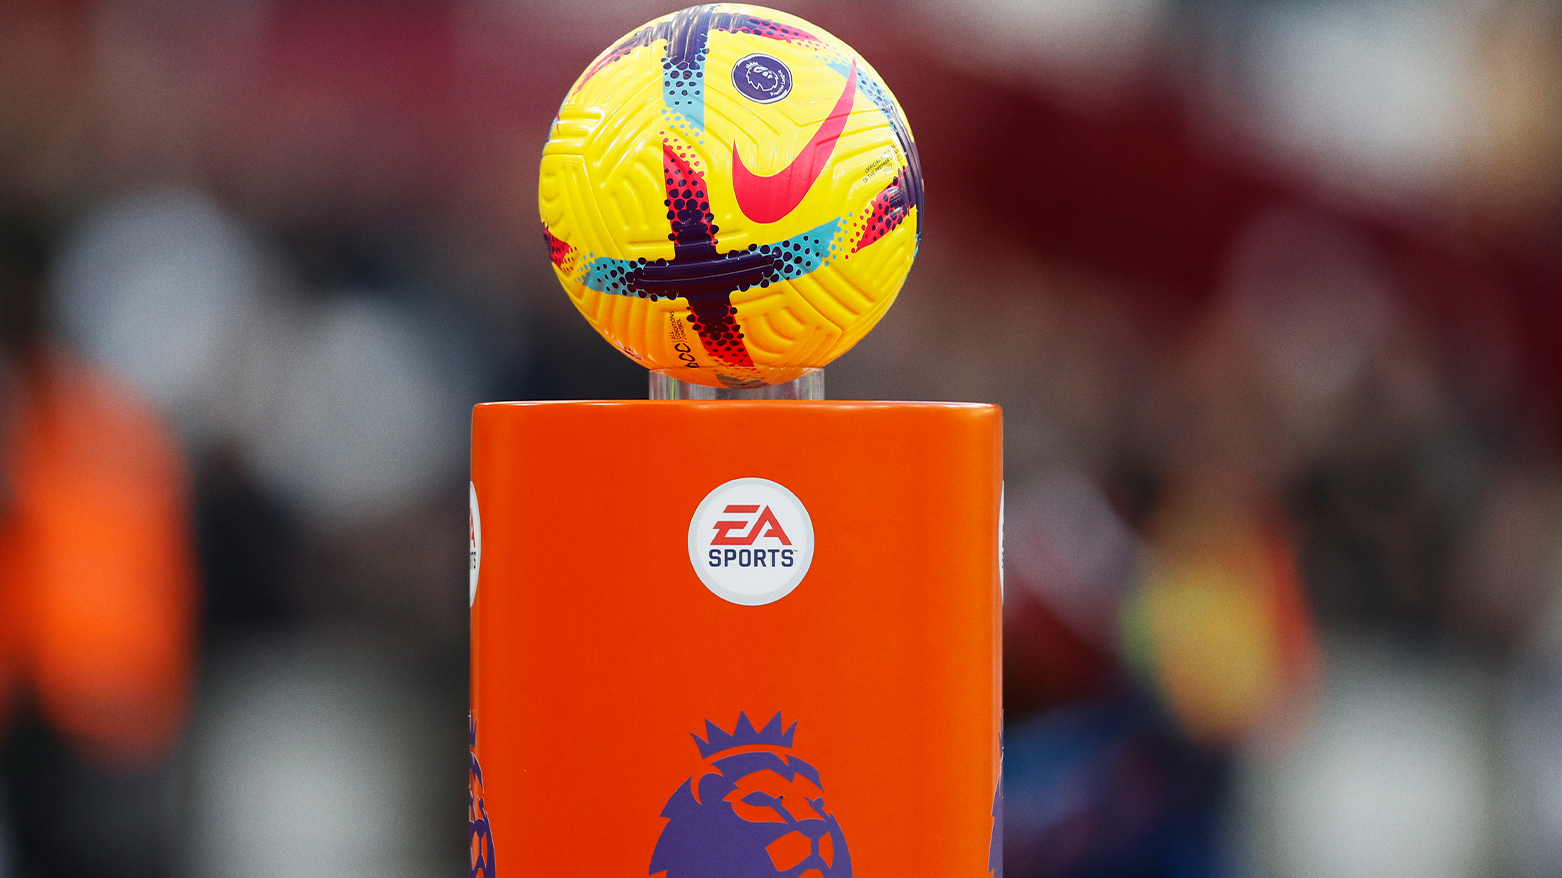 The match ball sits on a pedestal before the English Premier League football match. (Photo: AP)